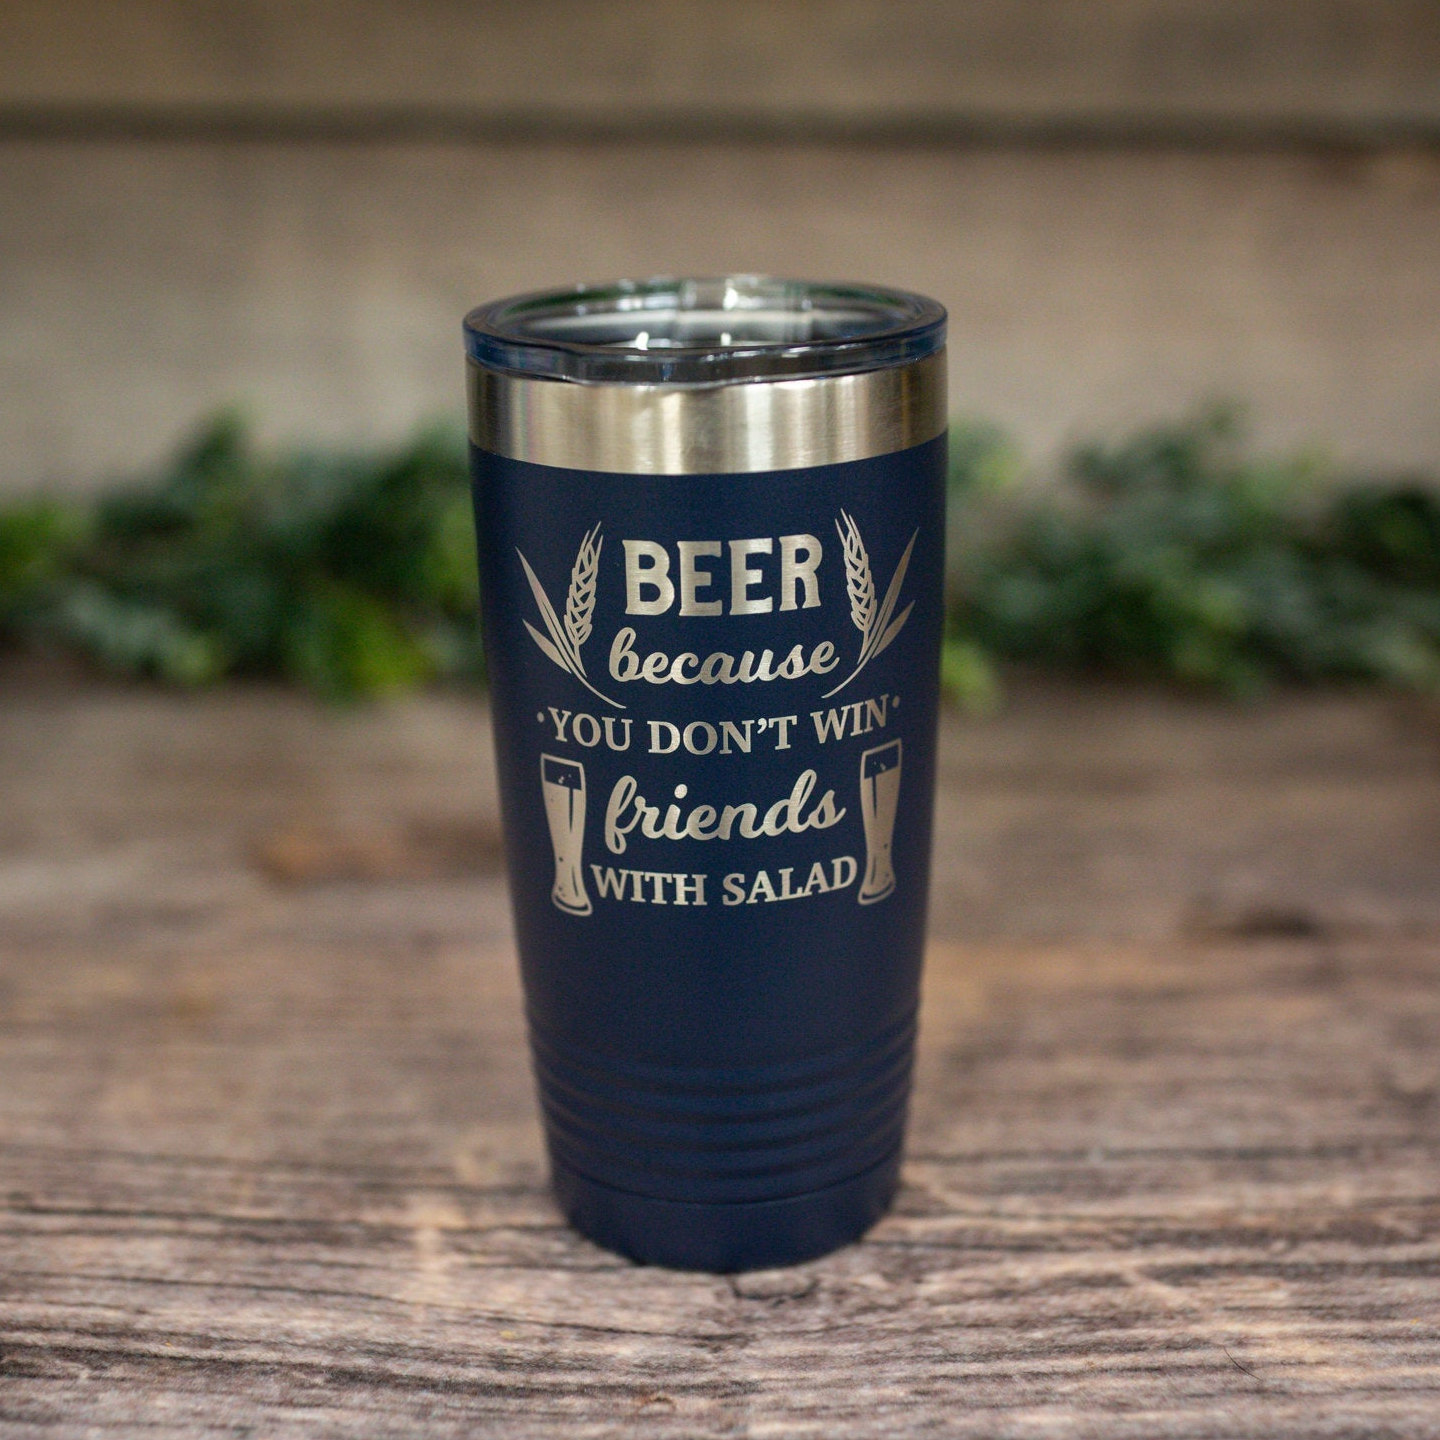 https://3cetching.com/wp-content/uploads/2021/07/beer-because-you-dont-win-friends-with-salad-engraved-stainless-tumbler-funny-gift-for-men-beer-lover-gift-60f749f9.jpg